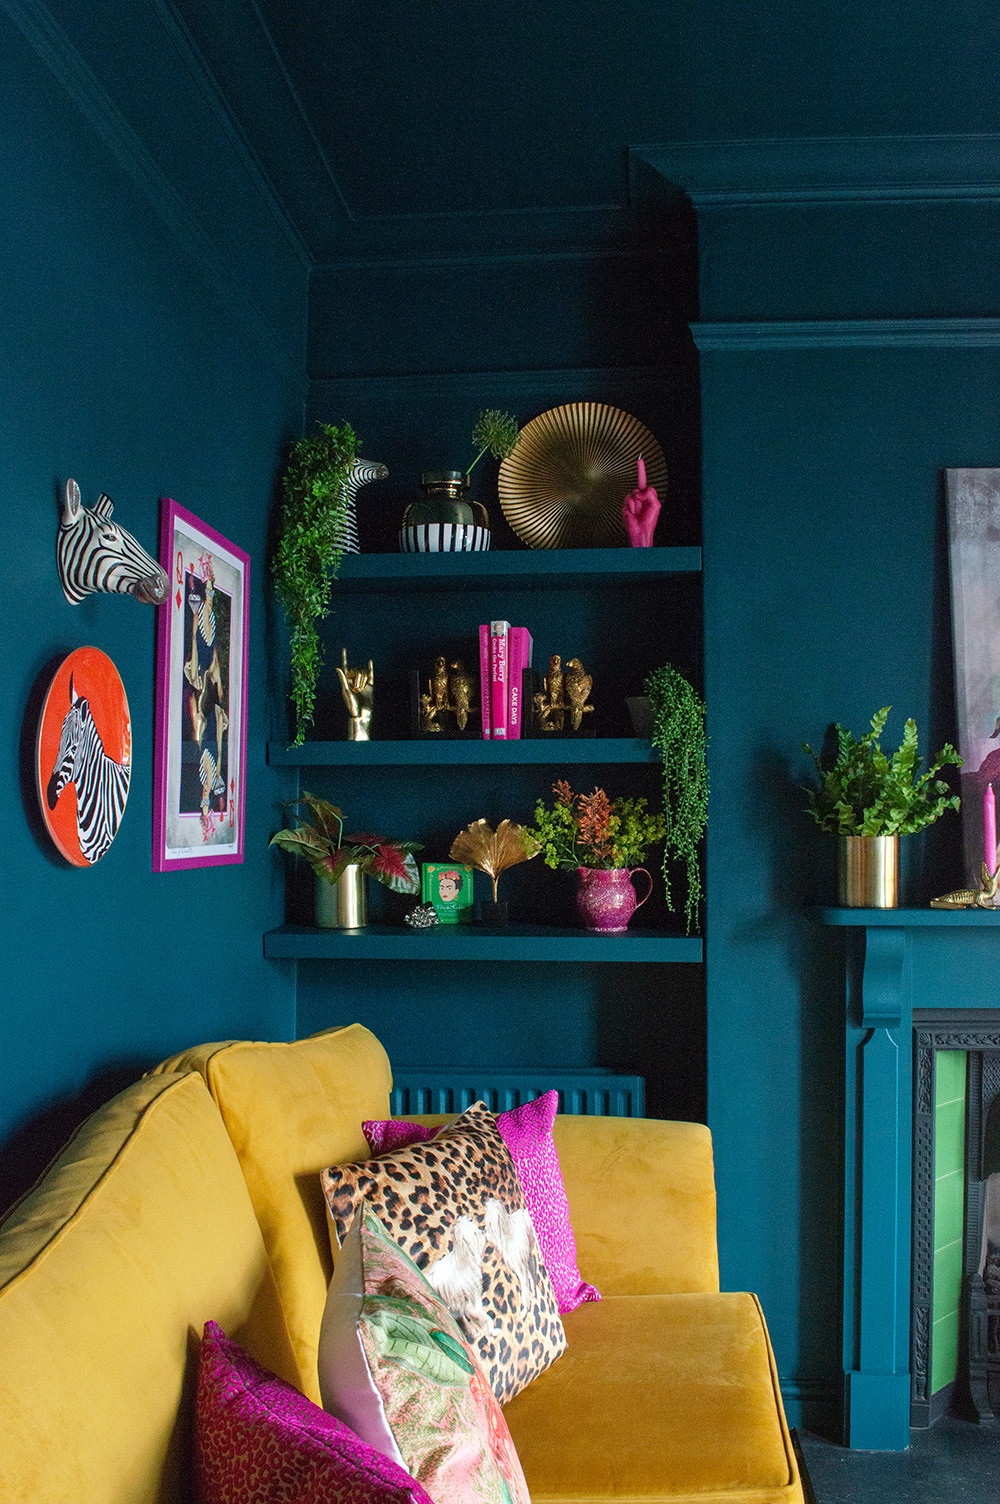 Teal and mustard living room. Colourful, maximalist decor inspiration with quirky prints and home accessories from Audenza.